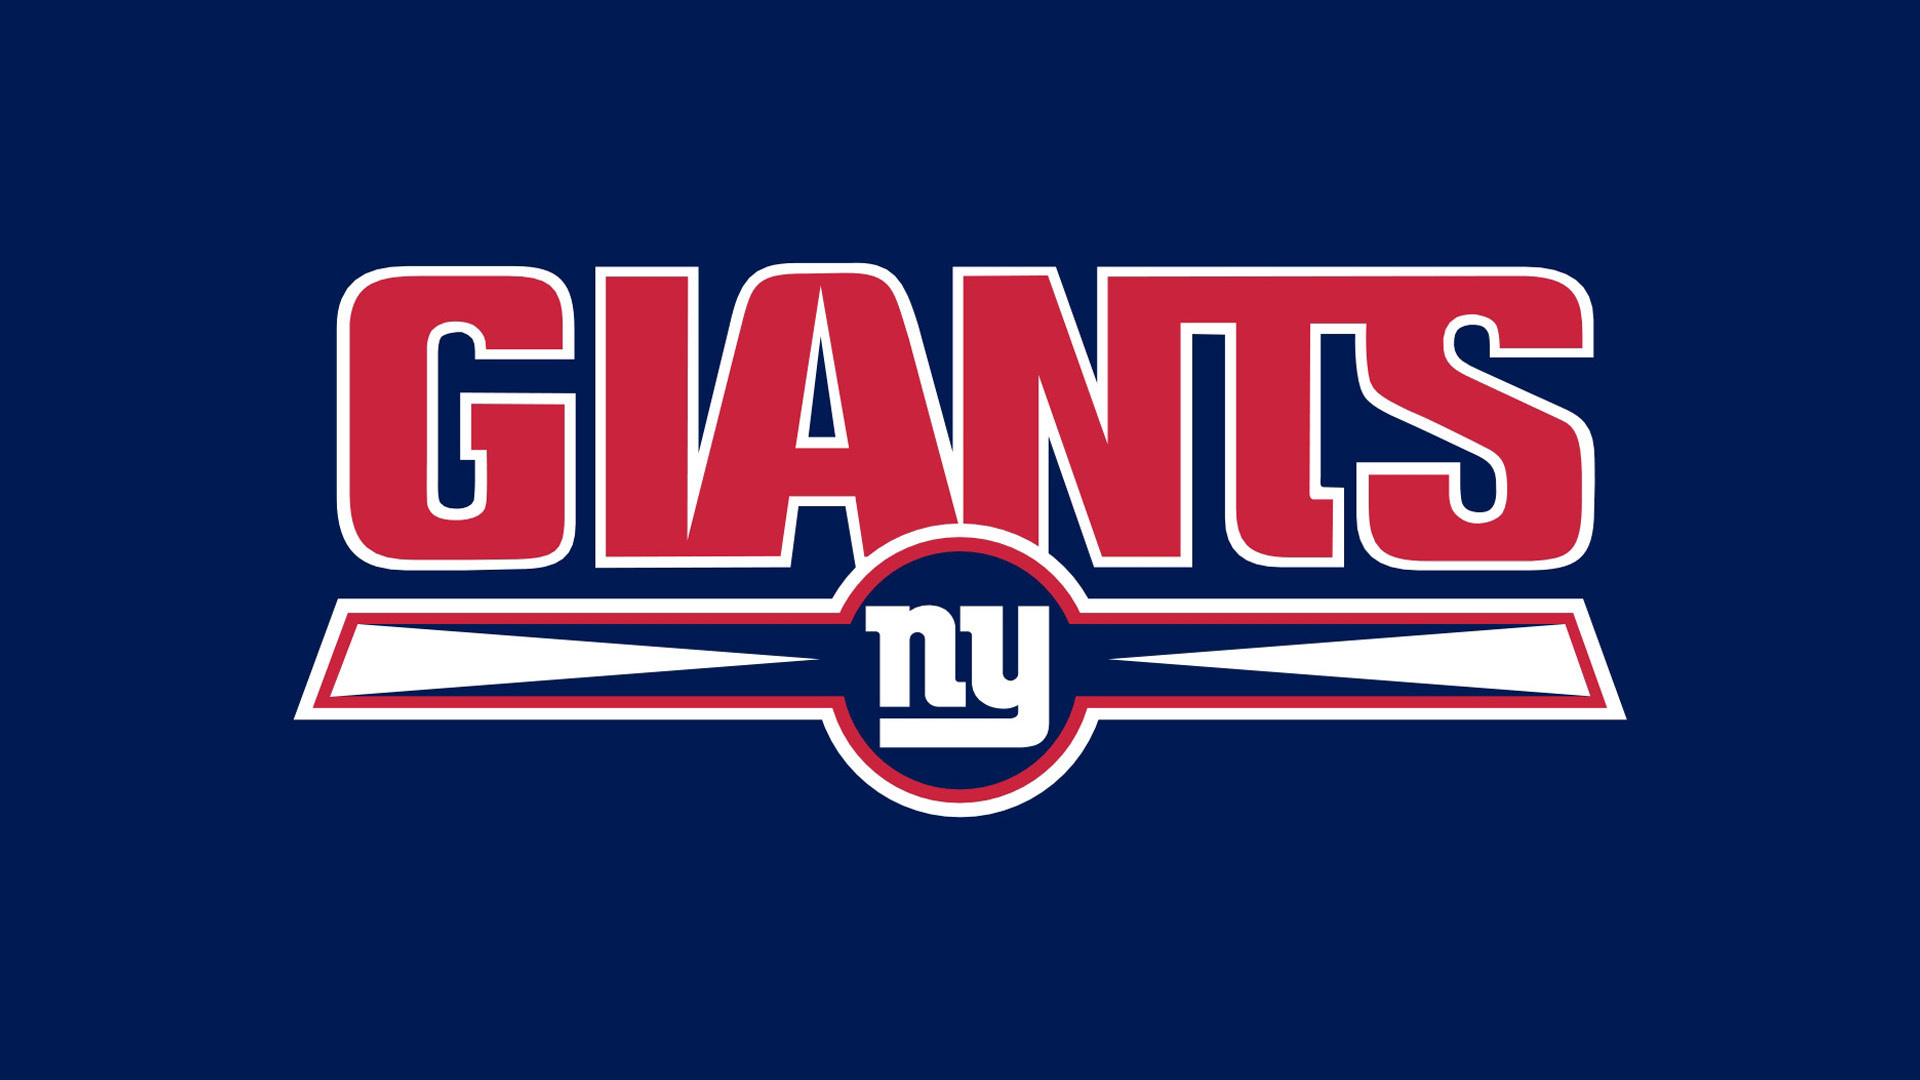 New York Giants Images